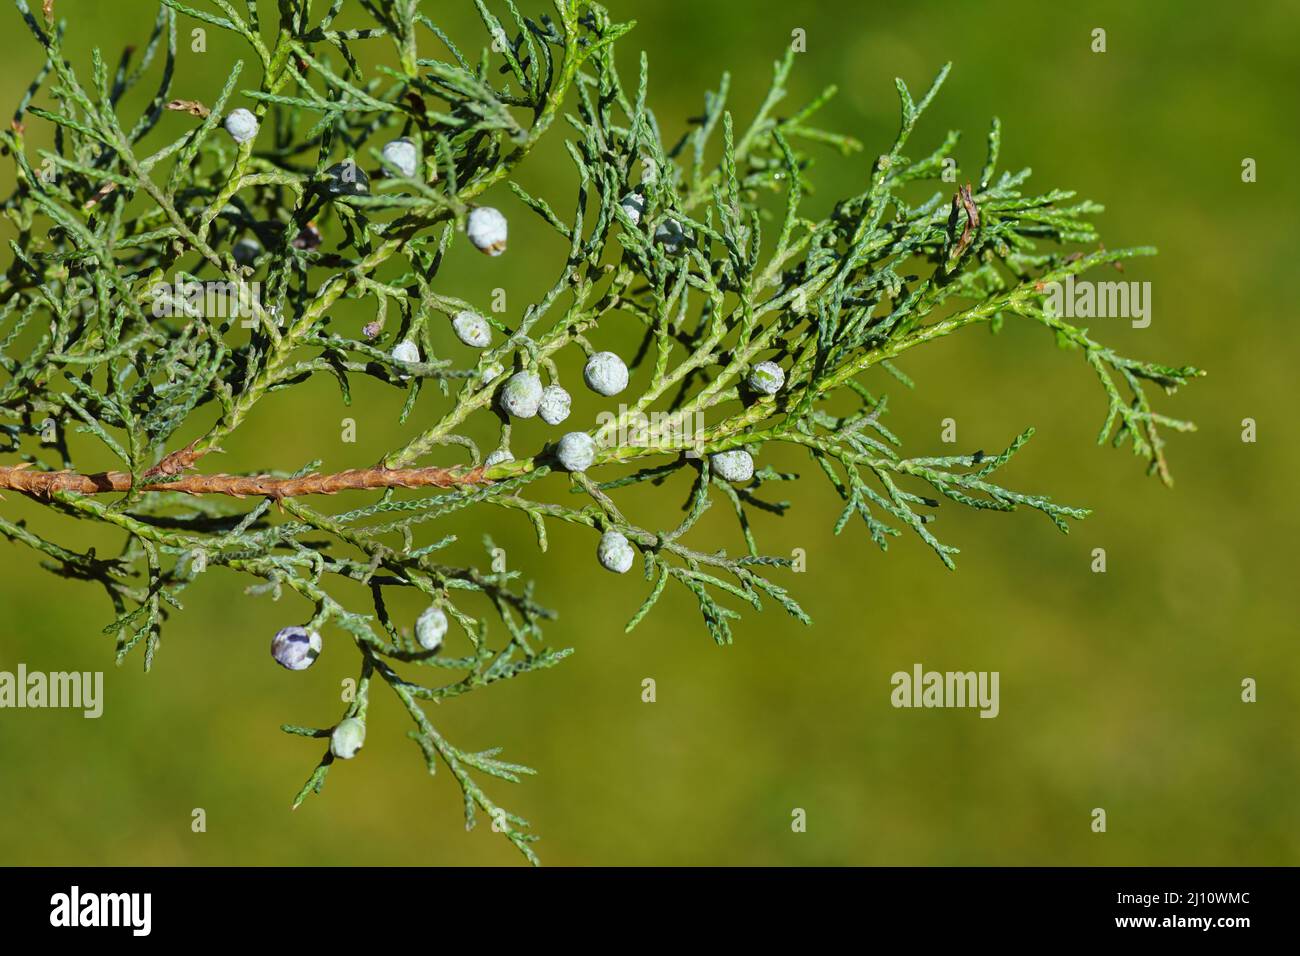 Close up green berries, cones in a branch of the shrub Juniperus communis, the common juniper, cypress family Cupressaceae. Dutch garden, May. Stock Photo